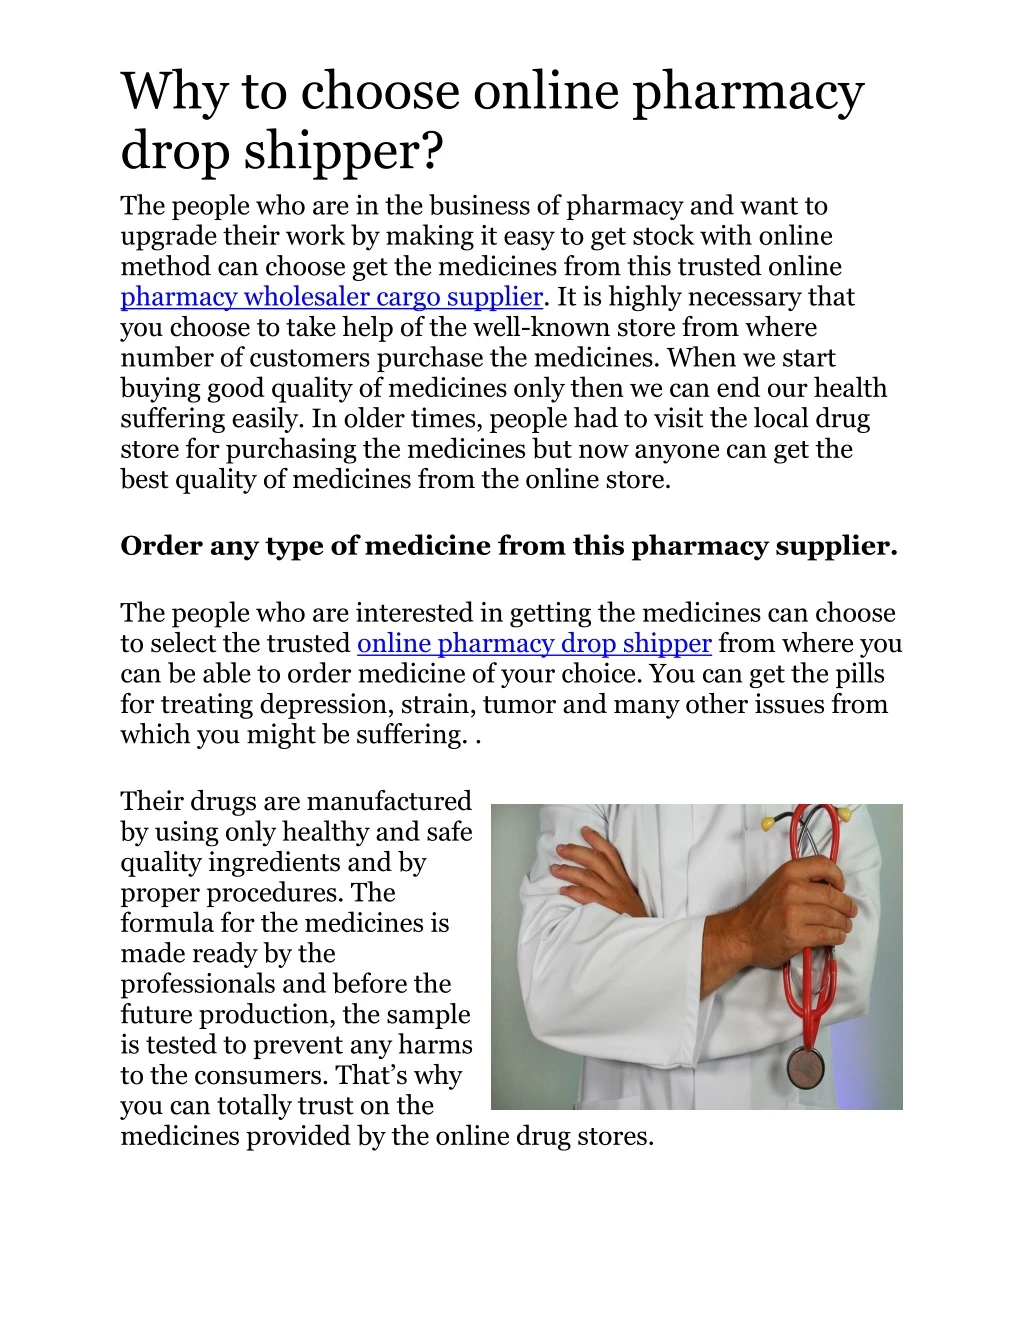 why to choose online pharmacy drop shipper